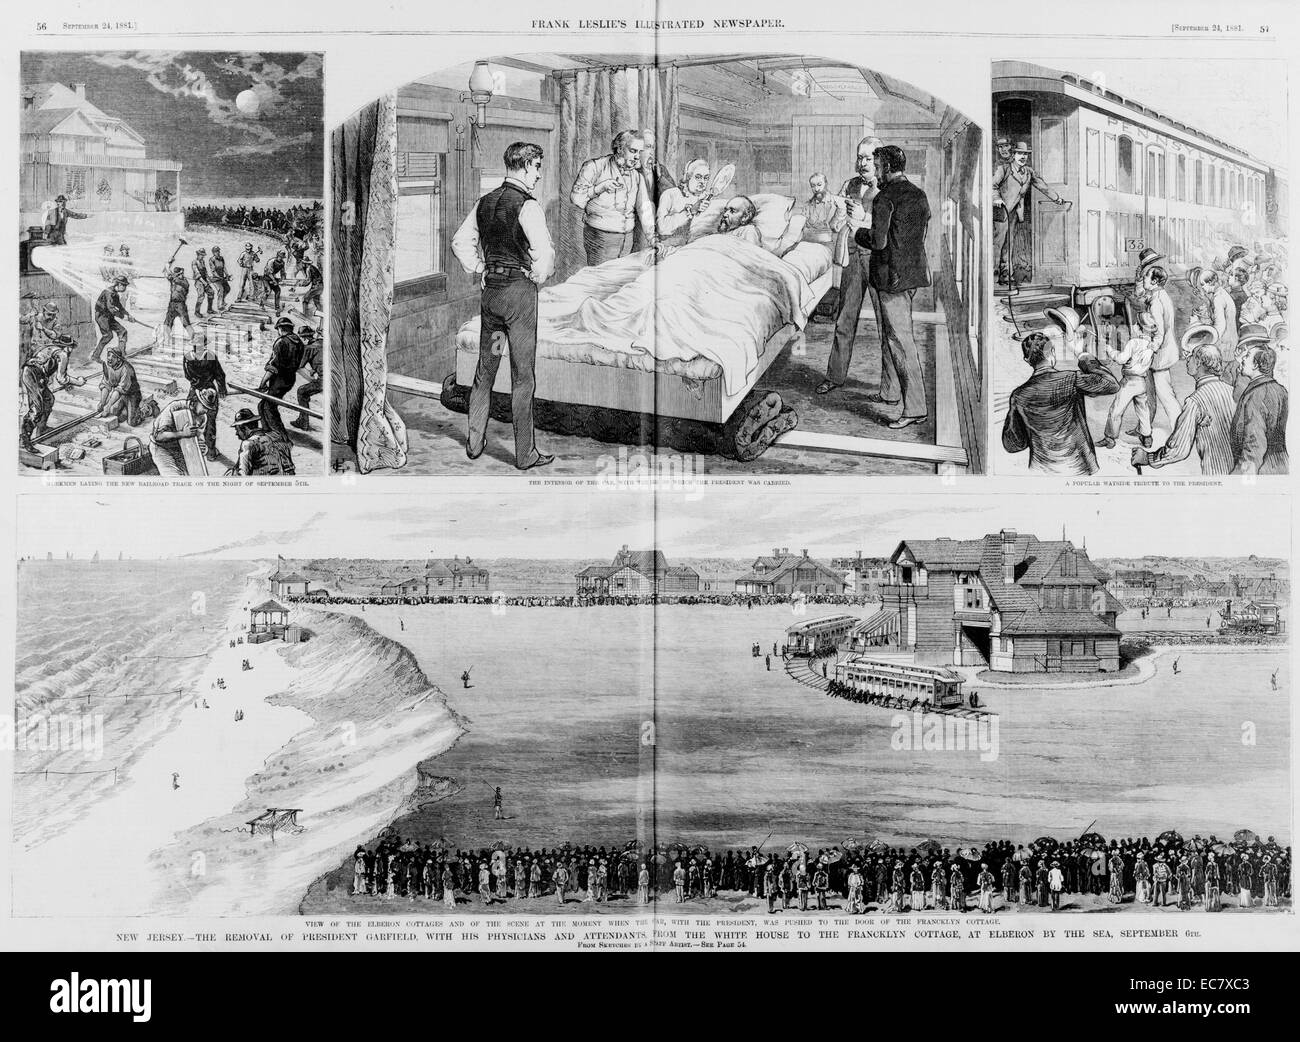 New Jersey--The removal of President Garfield (1831-1881), with his physicians and attendants, from the White House to the Francklyn cottage, at Elberon by the sea, September 6th. Garfield served as the 20th President of the United States, after completing nine consecutive terms in the U.S. House of Representatives Stock Photo